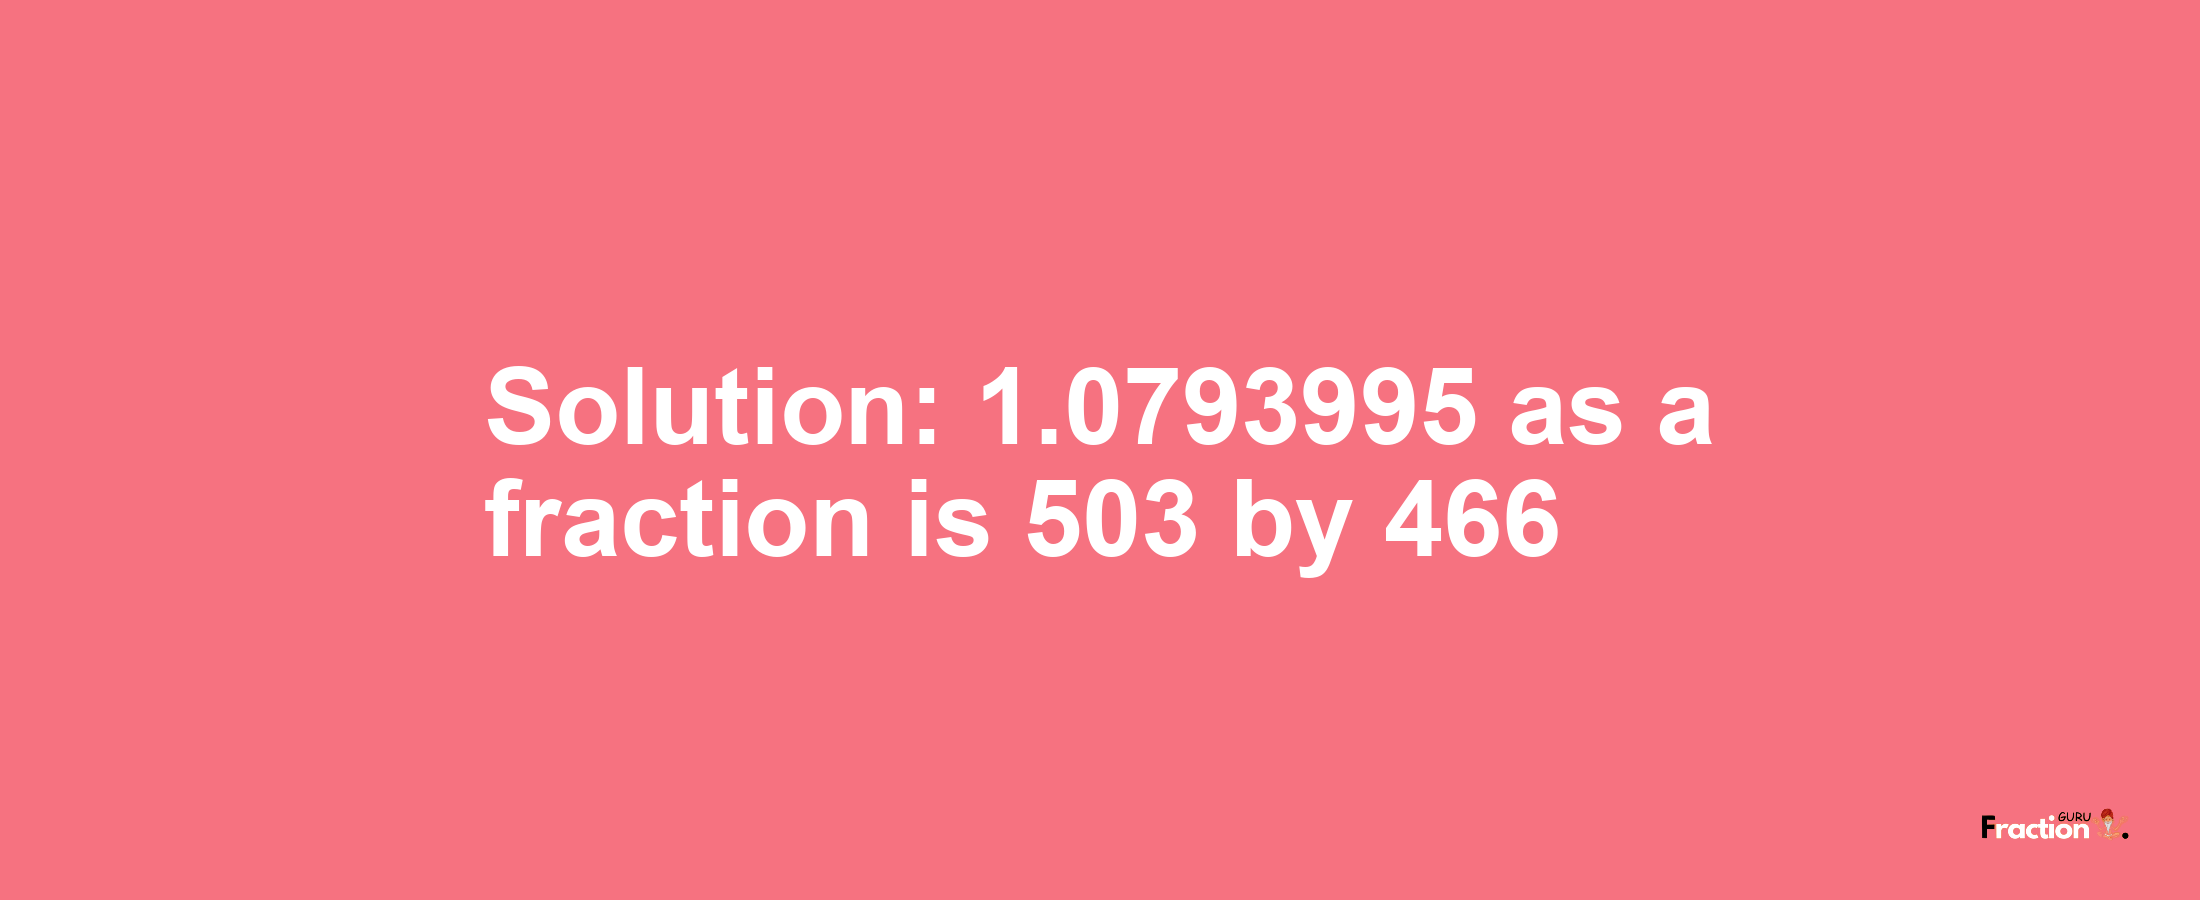 Solution:1.0793995 as a fraction is 503/466